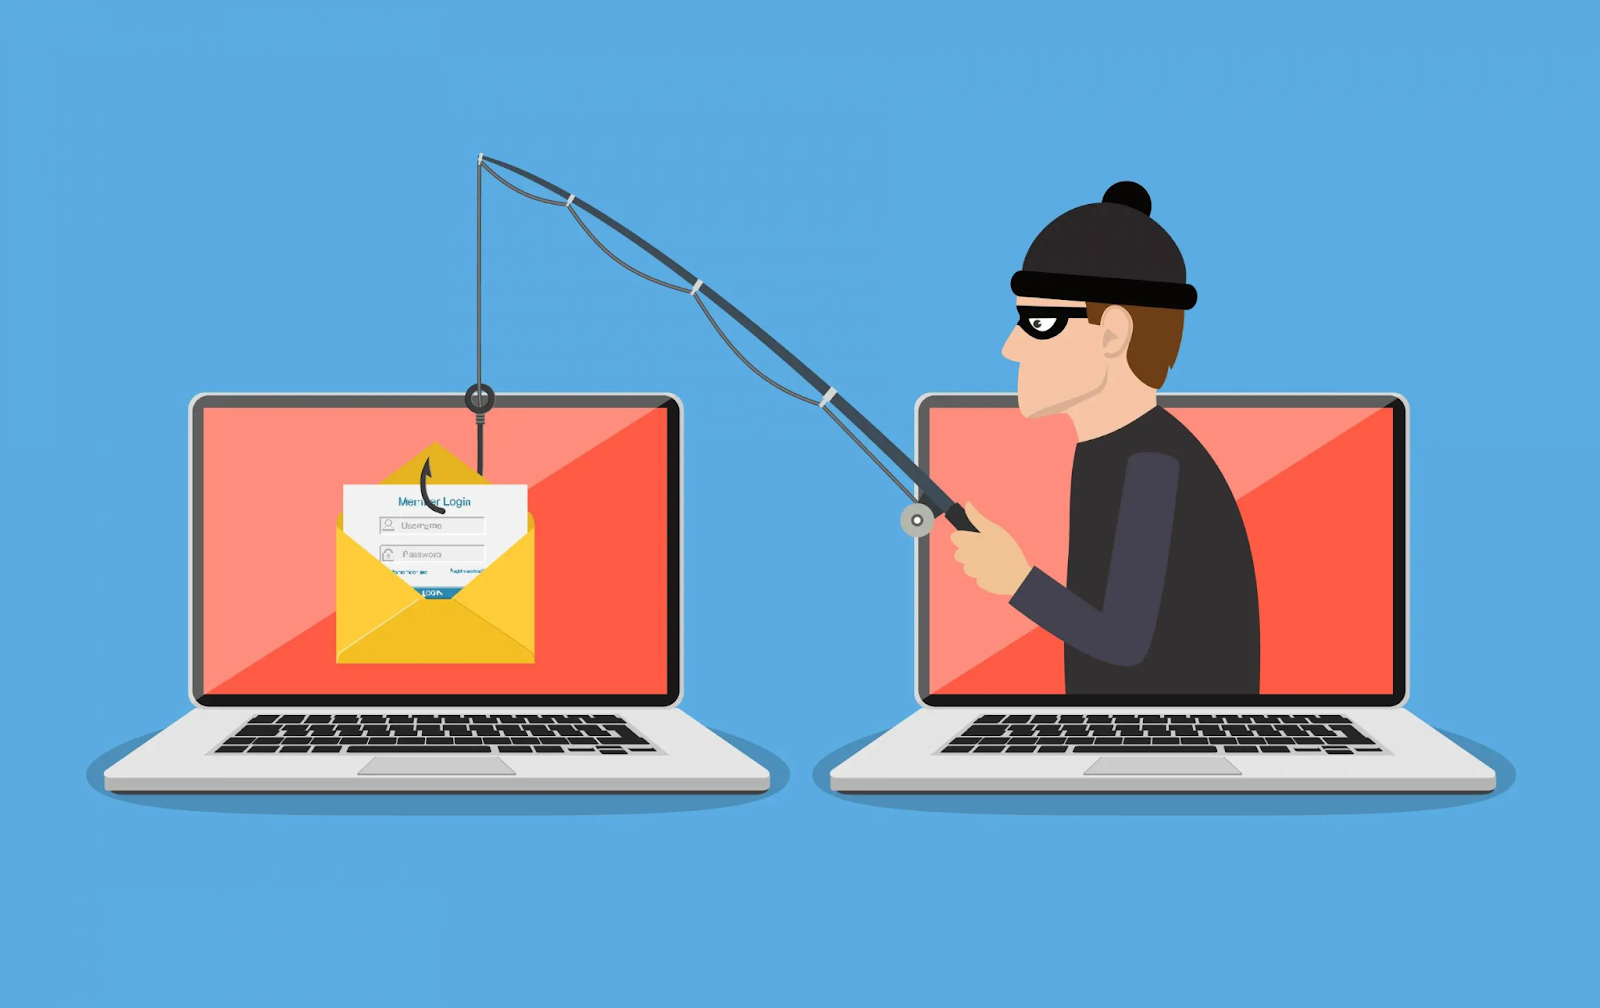 A thief emerging from one laptop screen uses a fishing pole to catch mail from another laptop screen.